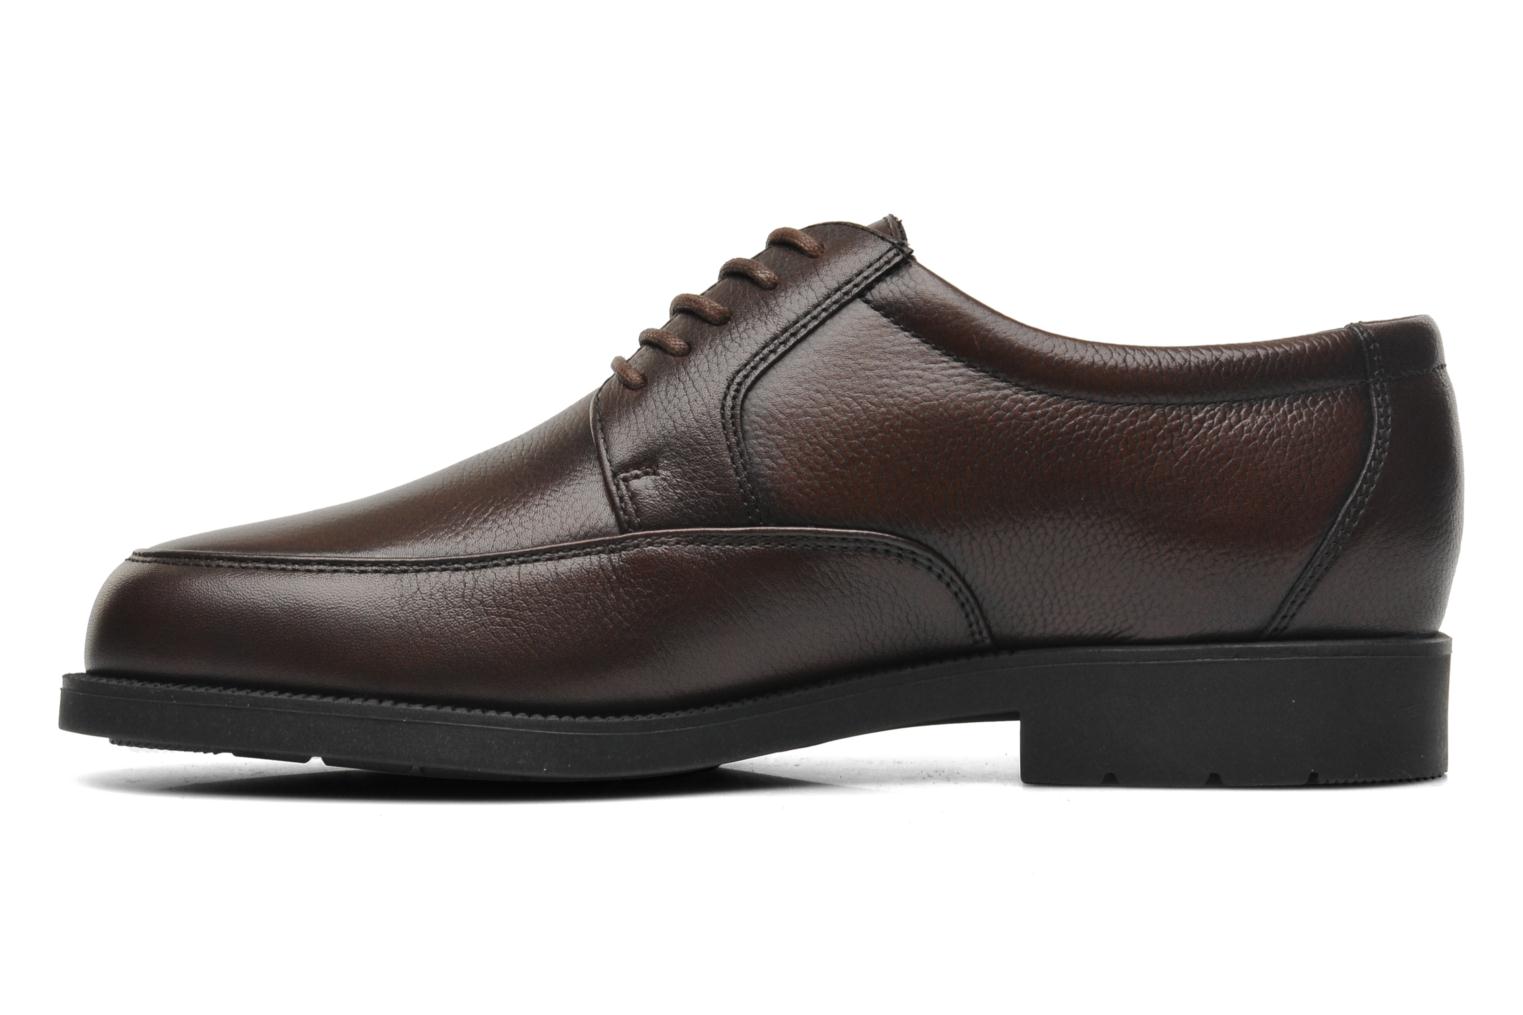 Sledgers Haven Lace-up shoes in Brown at Sarenza.co.uk (208442)